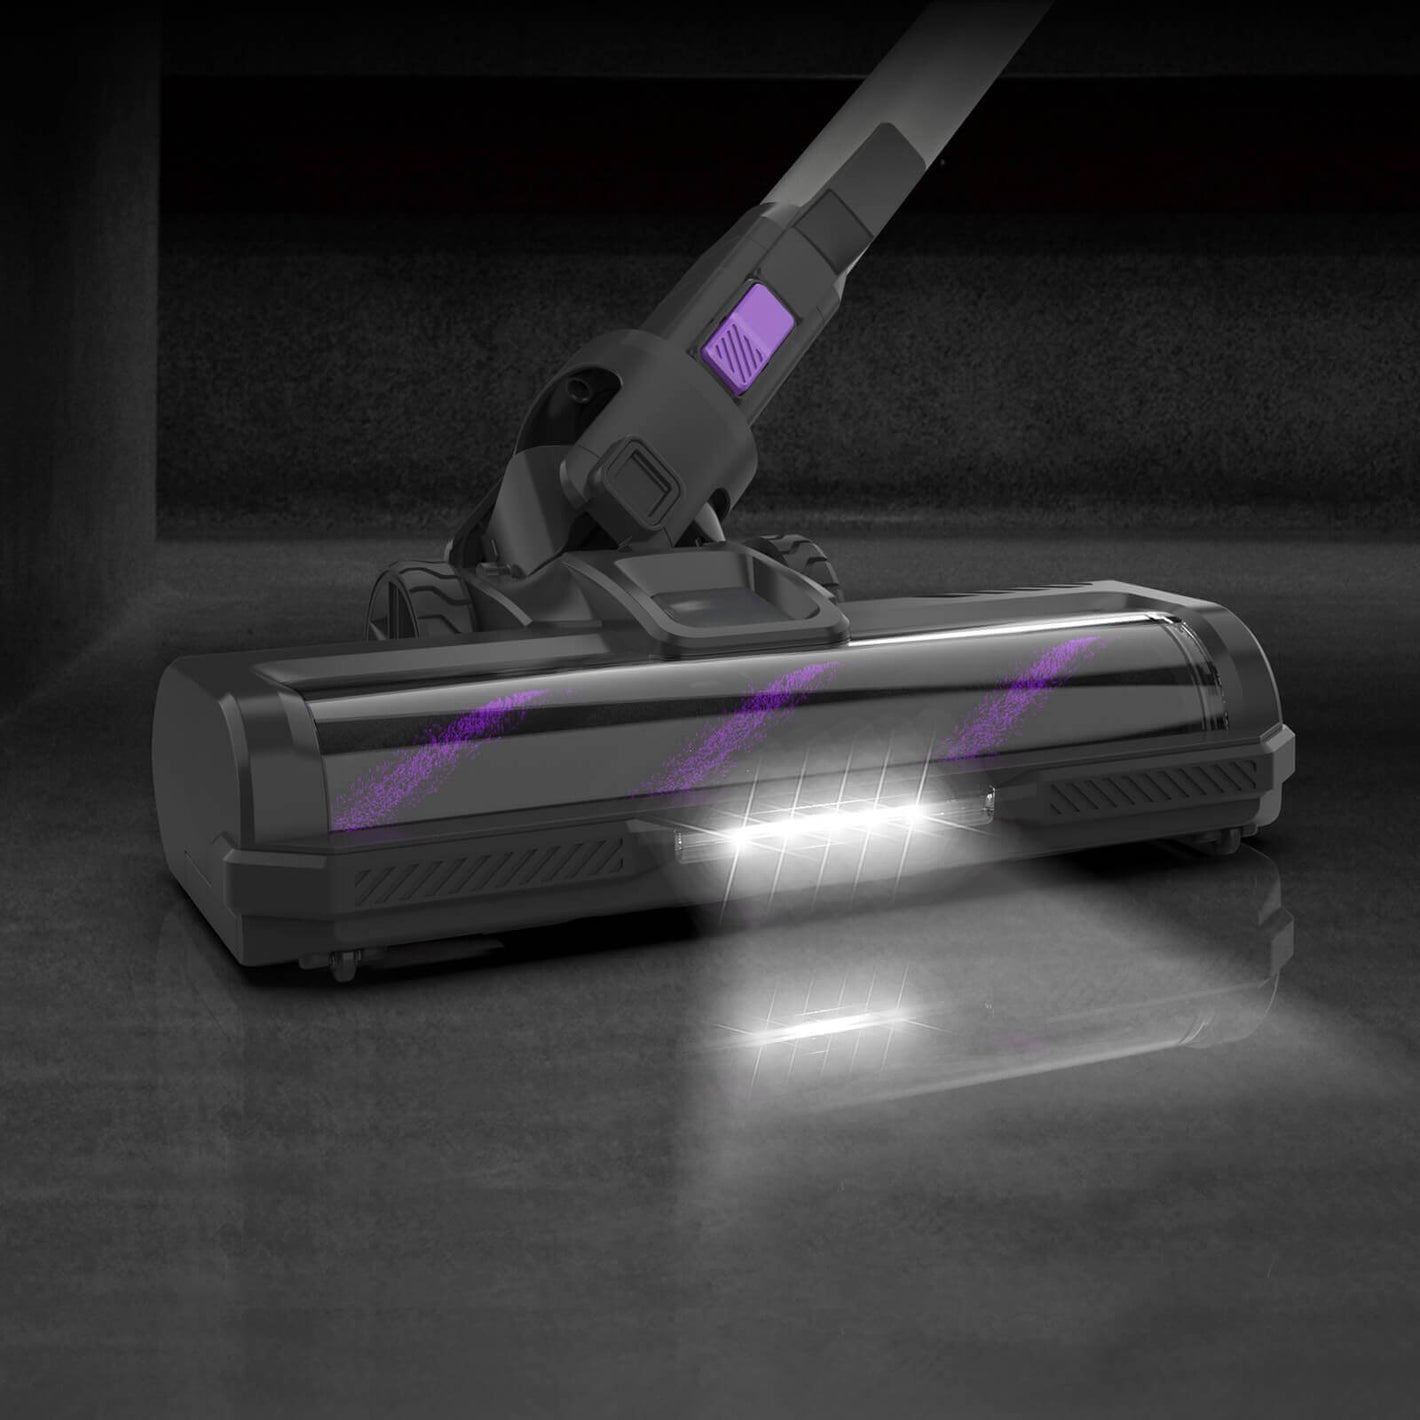 inse s10 cordless vacuum with LED lights on head brush-inselife.com